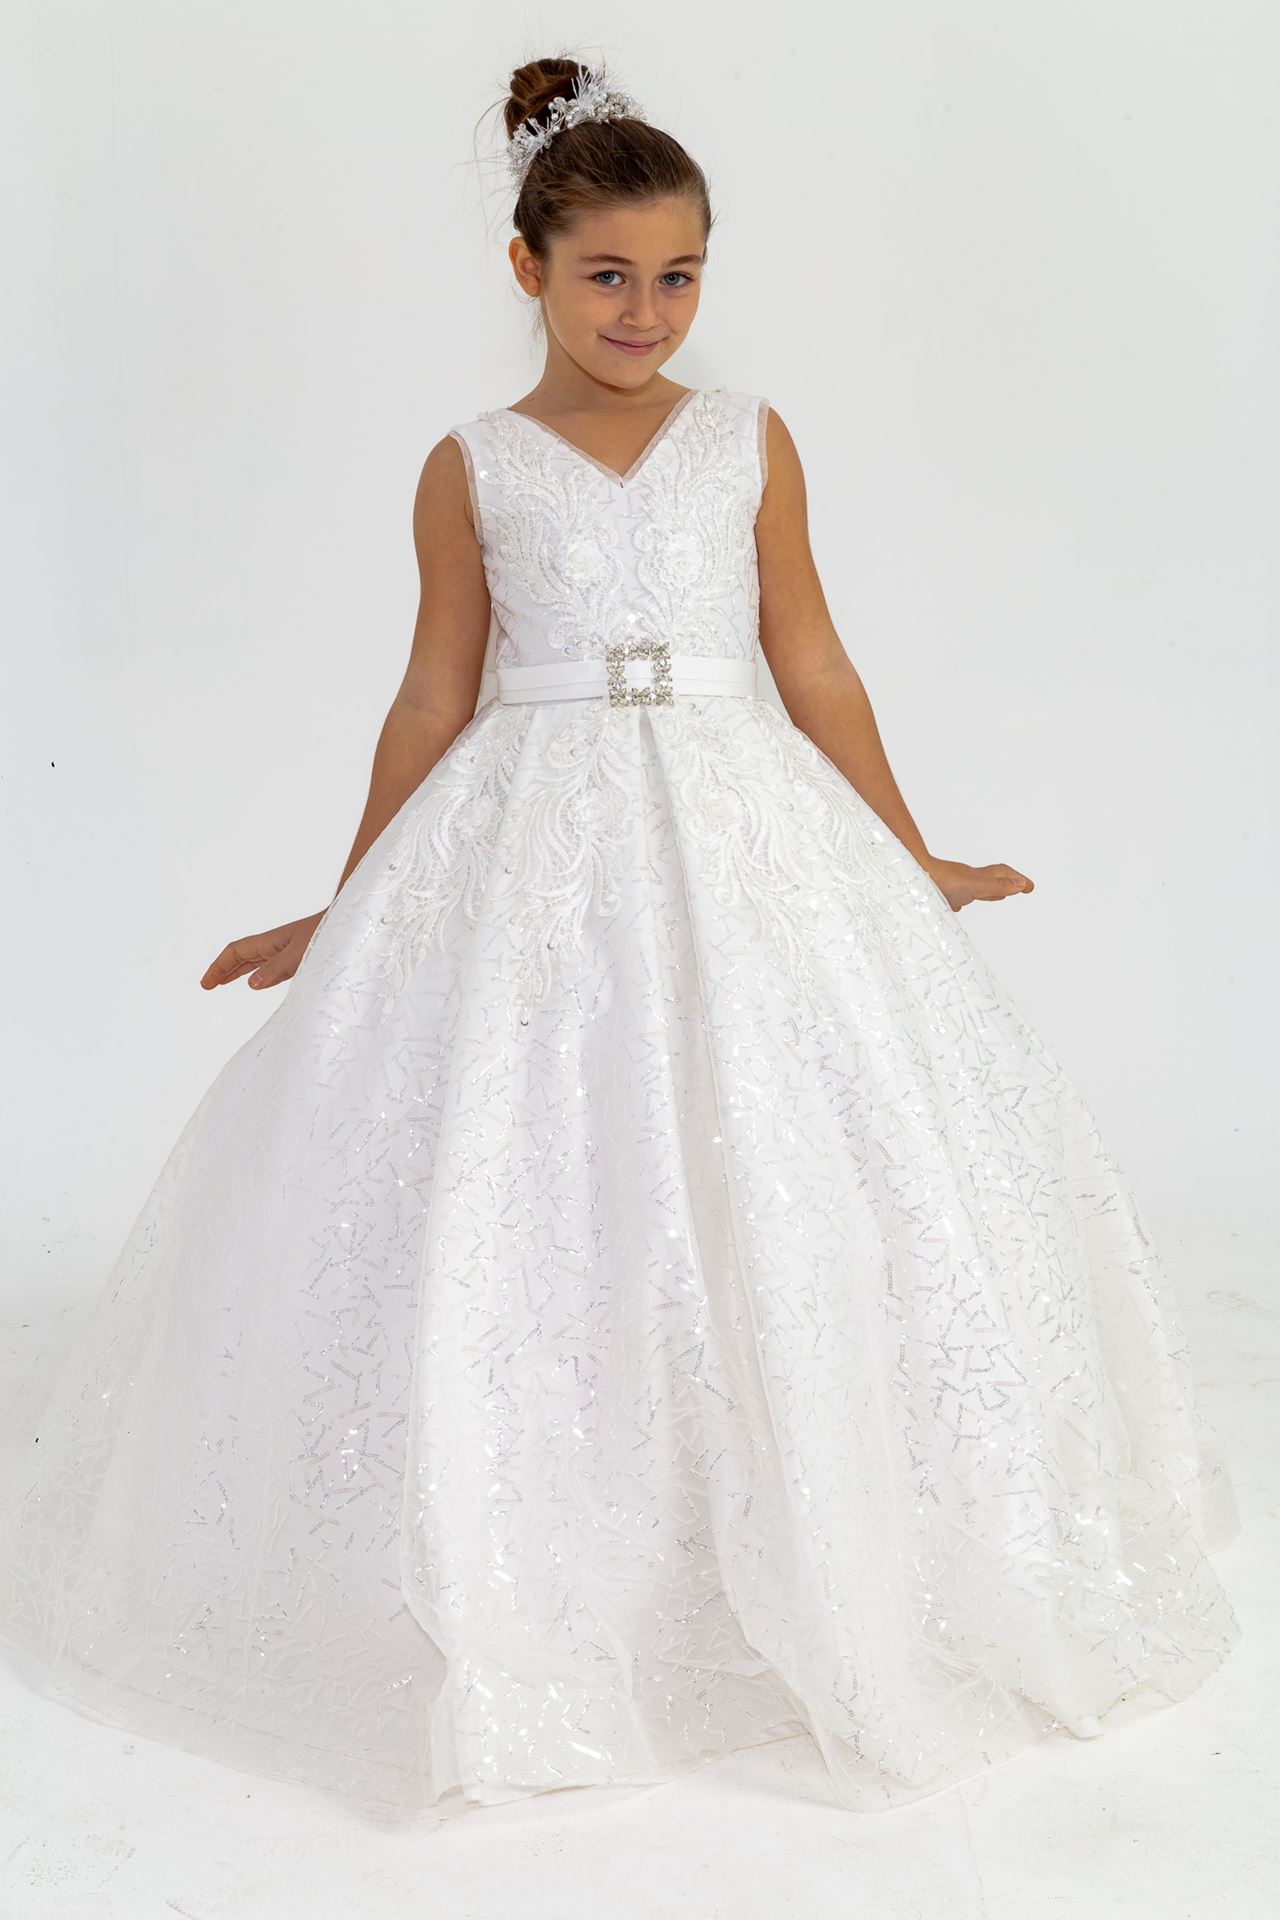 Azure 2-6 Years Old Girl Dress 20026 Off White